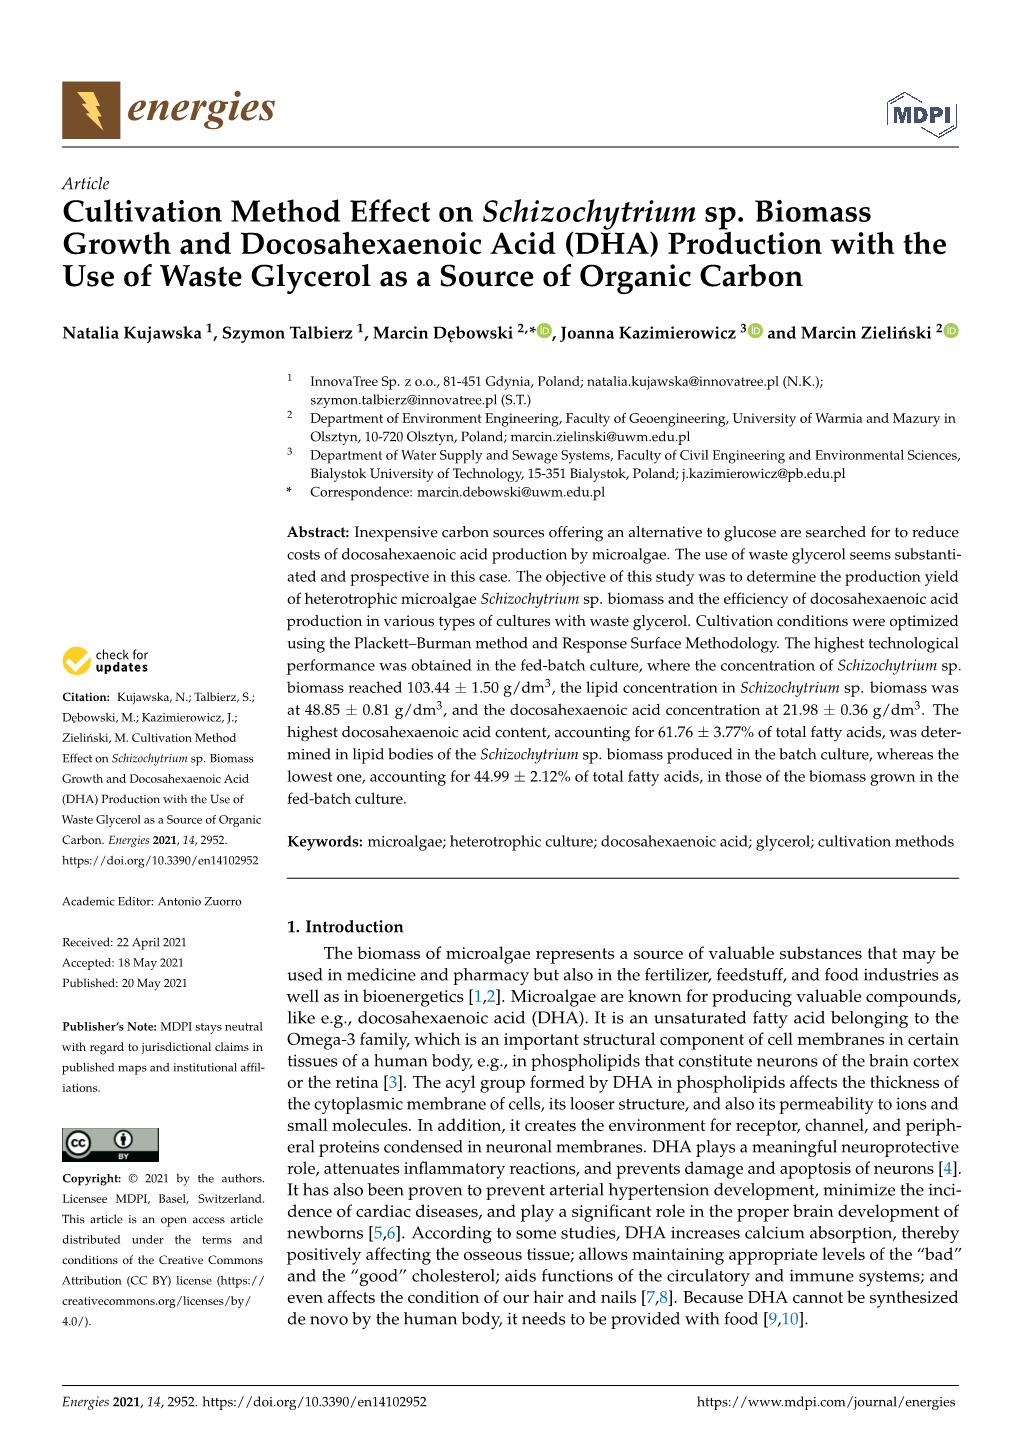 Cultivation Method Effect on Schizochytrium Sp. Biomass Growth and Docosahexaenoic Acid (DHA) Production with the Use of Waste Glycerol As a Source of Organic Carbon